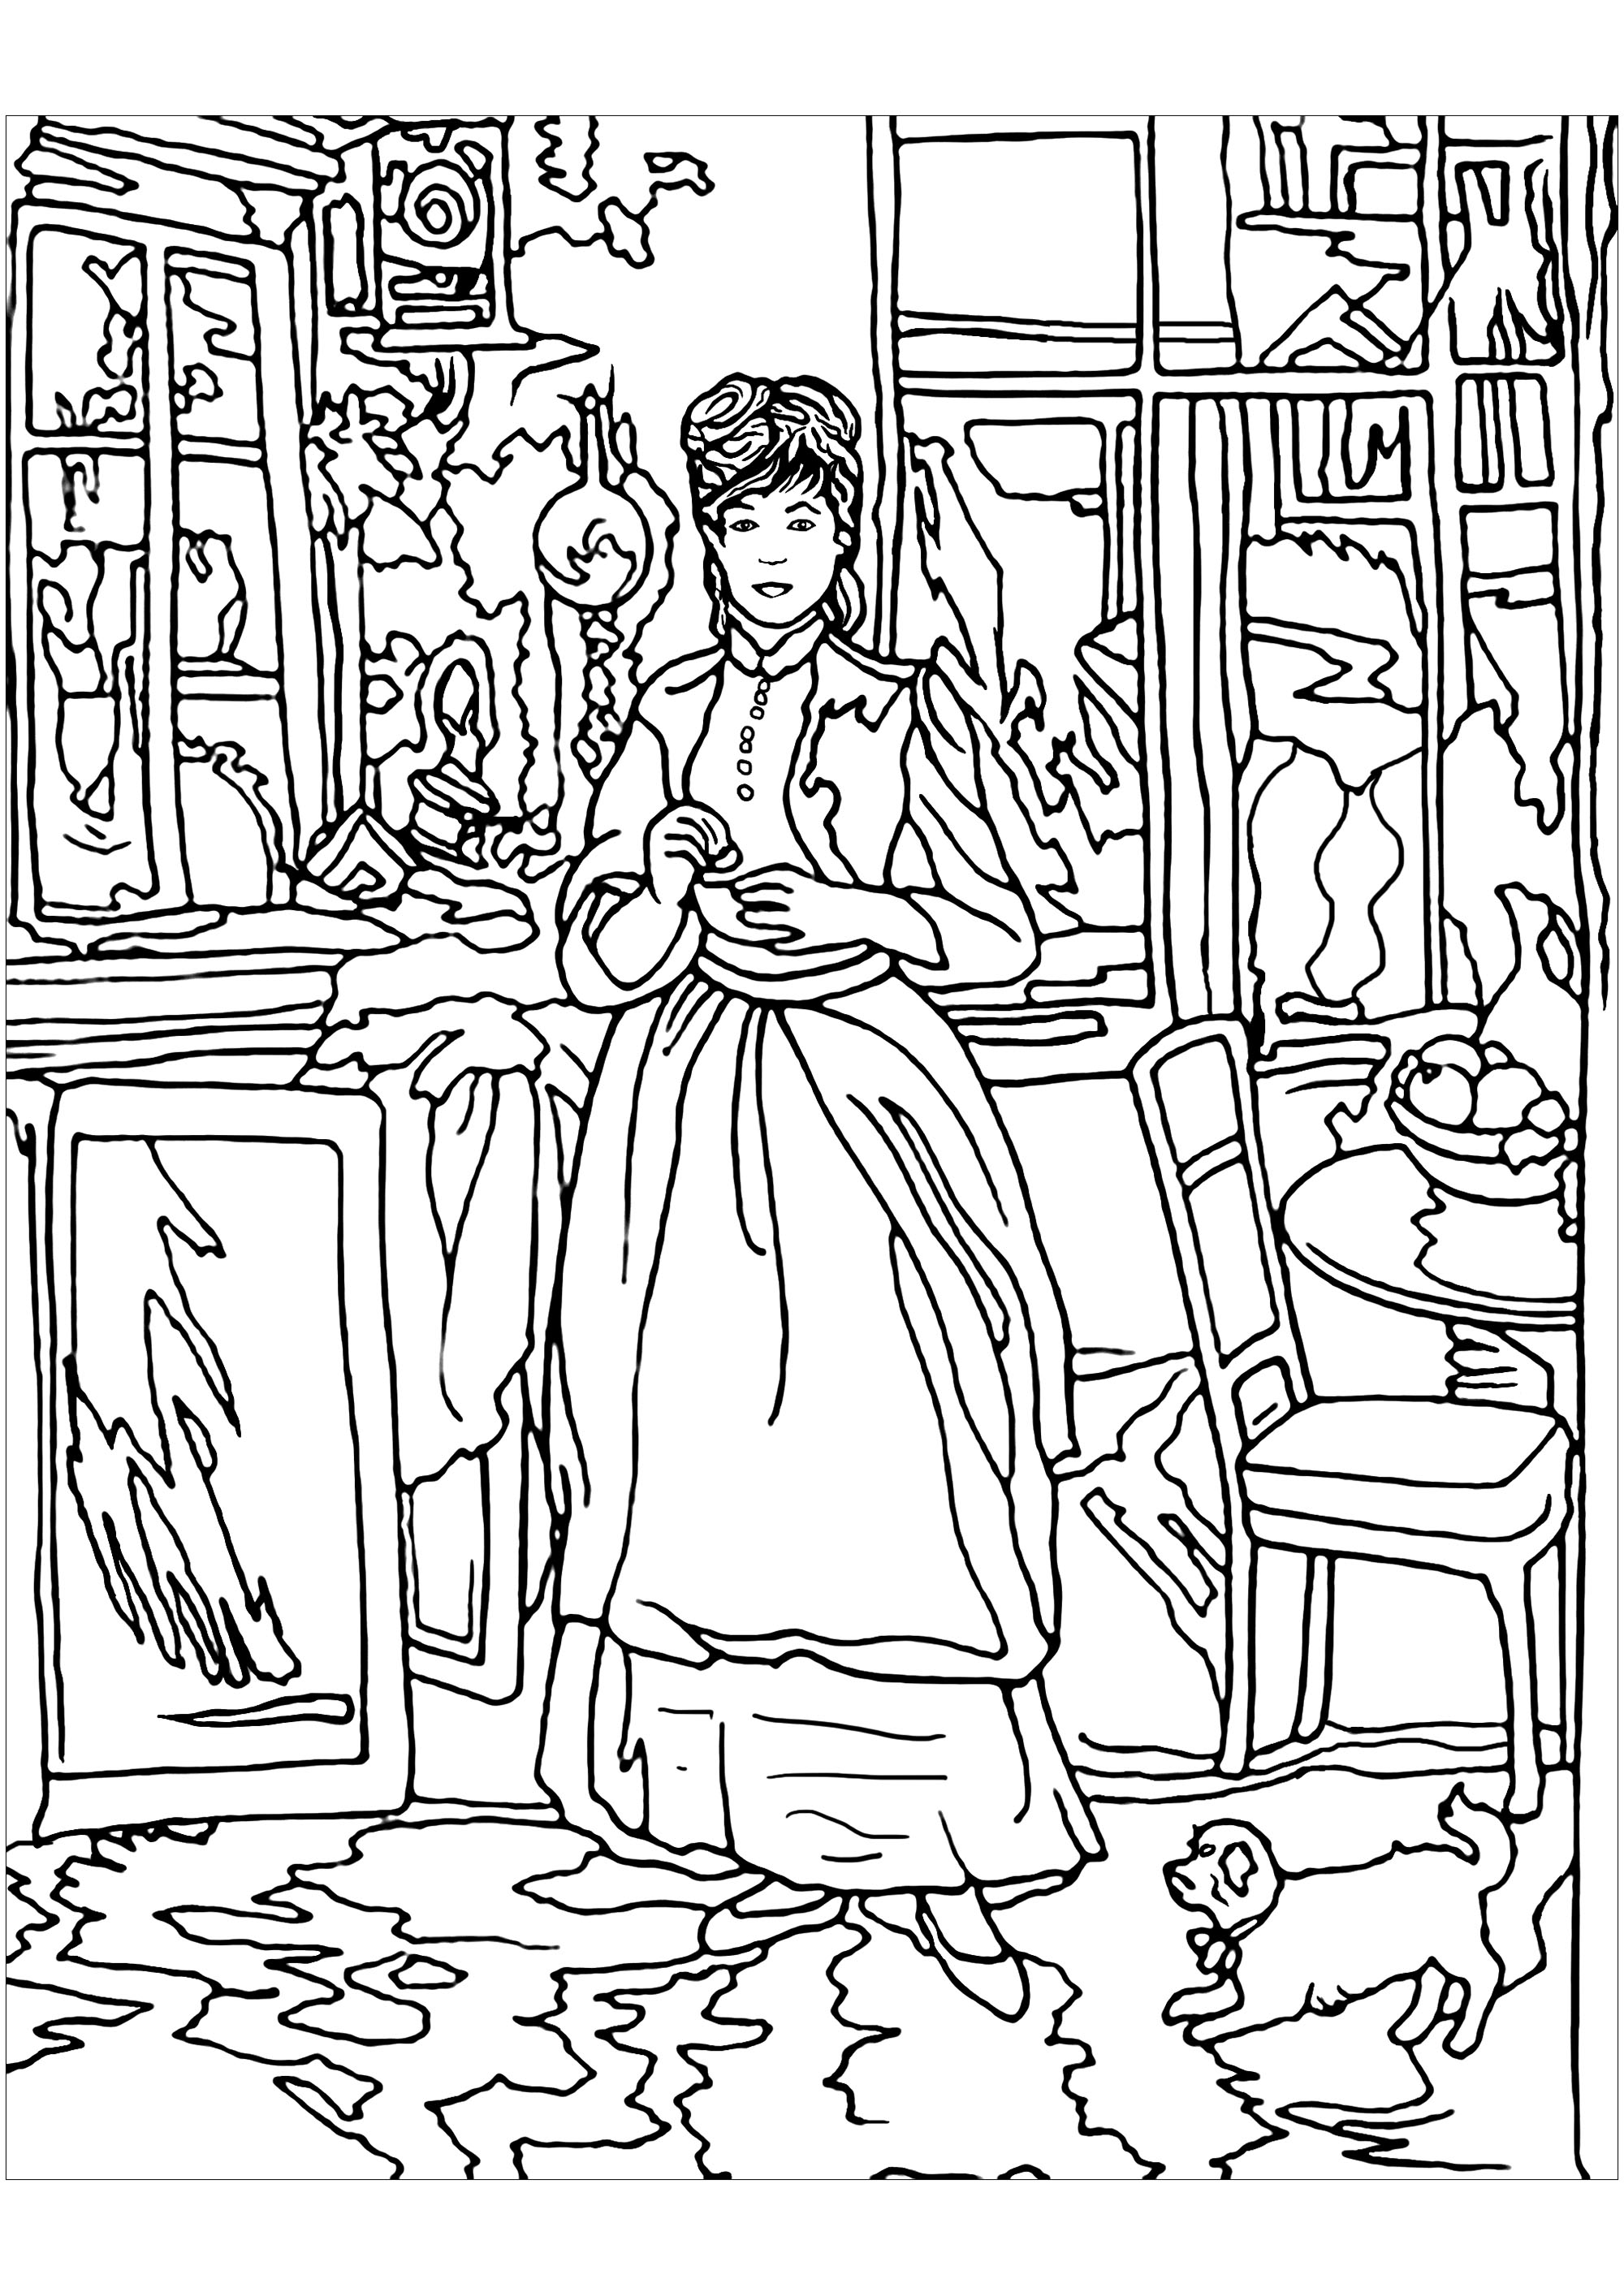 Coloring page inspired by a work by Impressionist painter Berthe Morisot : In the dinning room. . Morisot's paintings reveal aspects of feminine life in the late nineteenth century, even private, intimate moments generally closed to male counterparts, Artist : Art. Isabelle